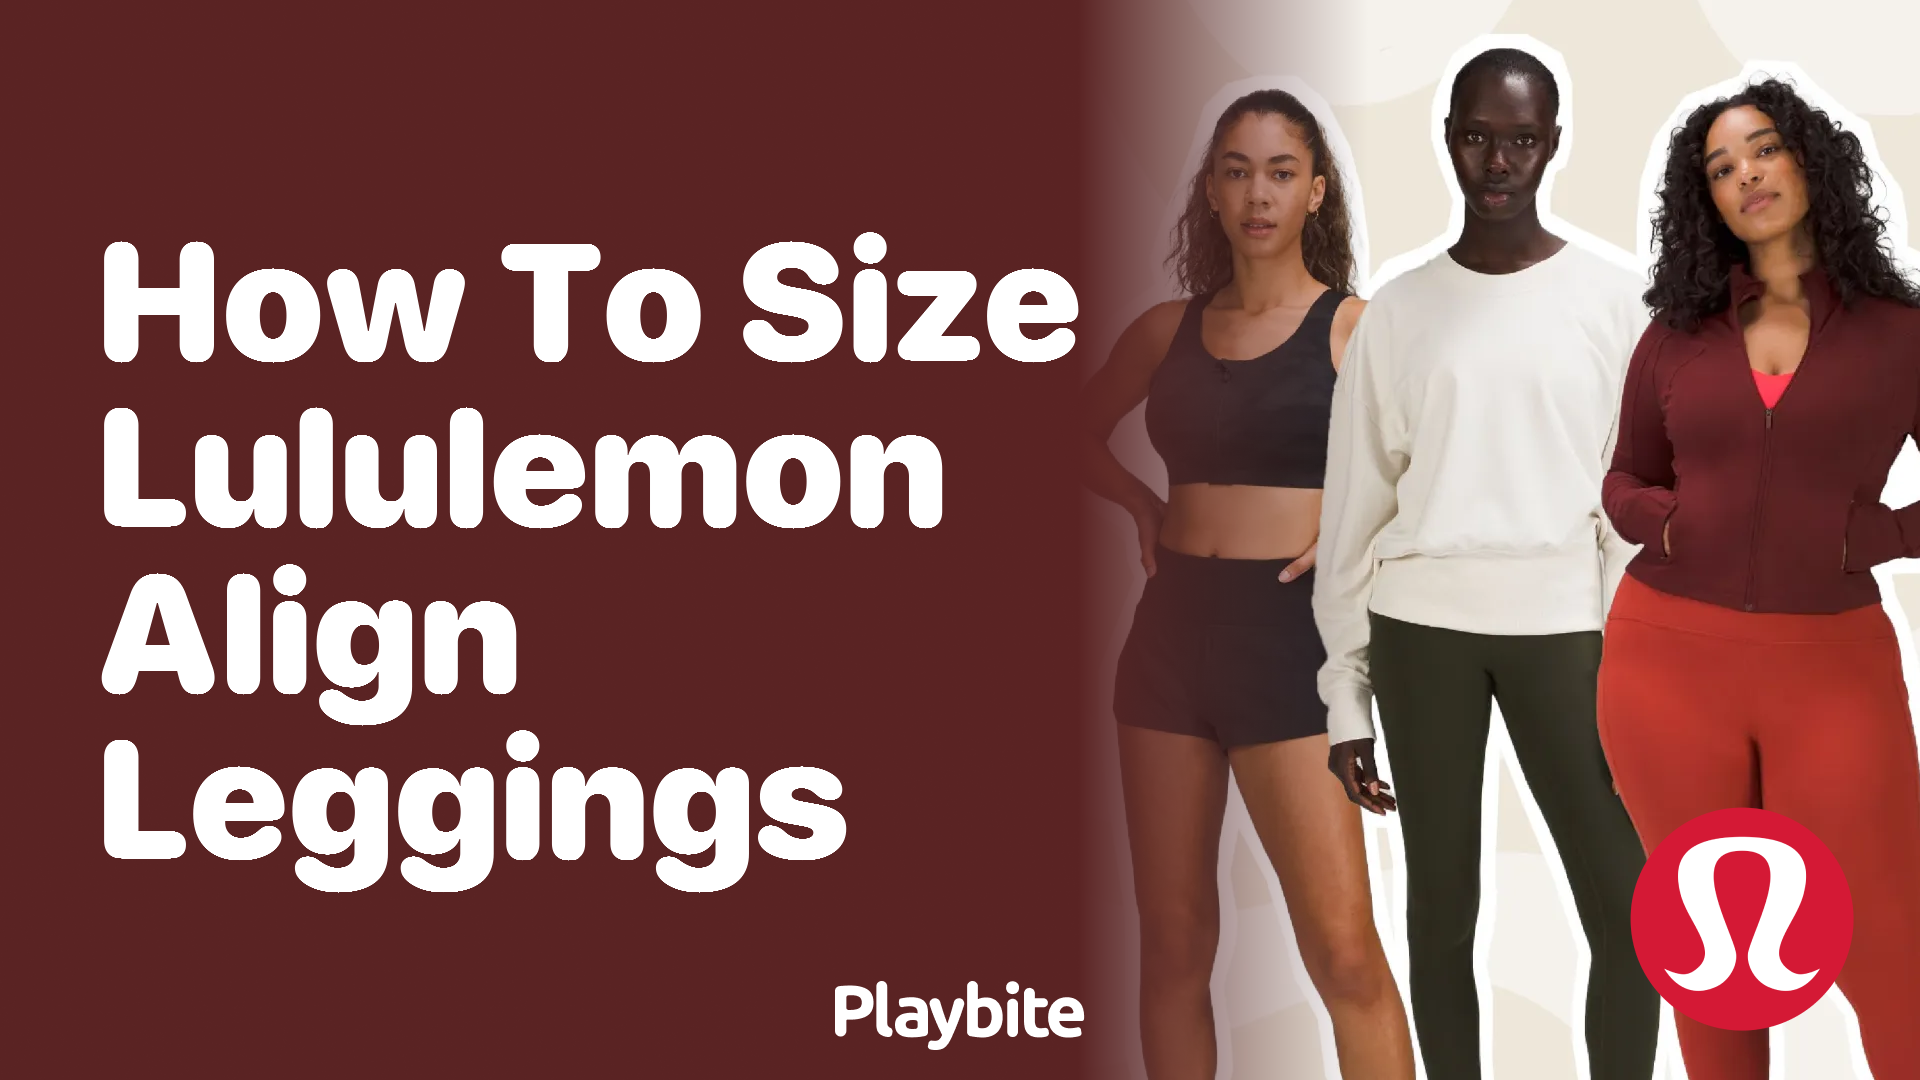 Are Lululemon 25 Inch Leggings Considered Cropped? - Playbite